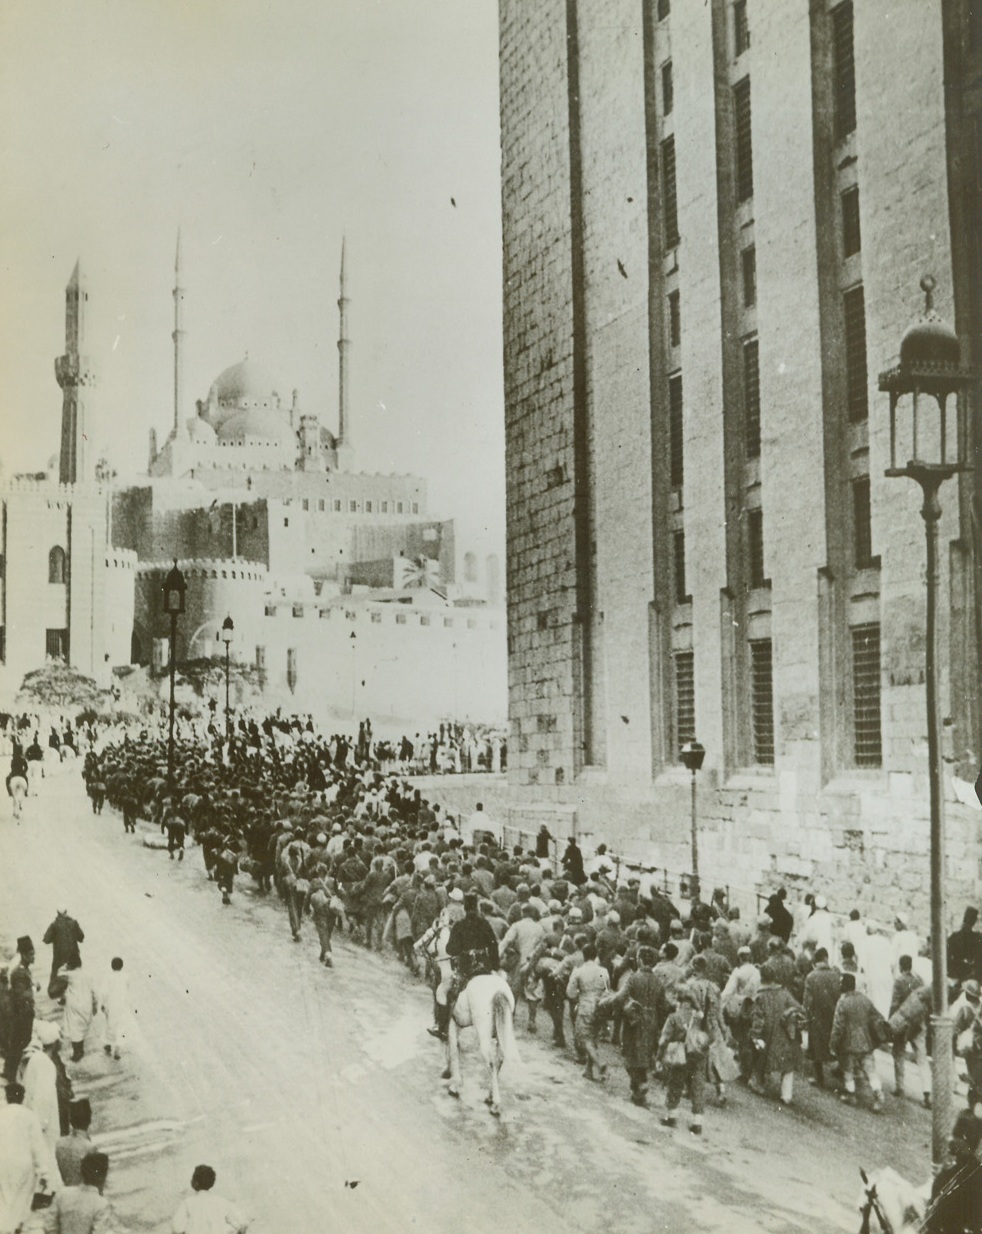 Axis Prisoners of British Reach Cairo, 1/2/1942. Cairo, Egypt – A column of prisoners, captured in Libya during the current British offensive, as they neared the massive walls of the Citadel of Cairo, built by Saladin, showing the landmark of the Mohamed Al Mosque above, and the Mosque of Sultan Hassan (right).  Note crowd of curious natives at left.  They are being escorted by Egyptian mounted police (white horses). Credit line (ACME;